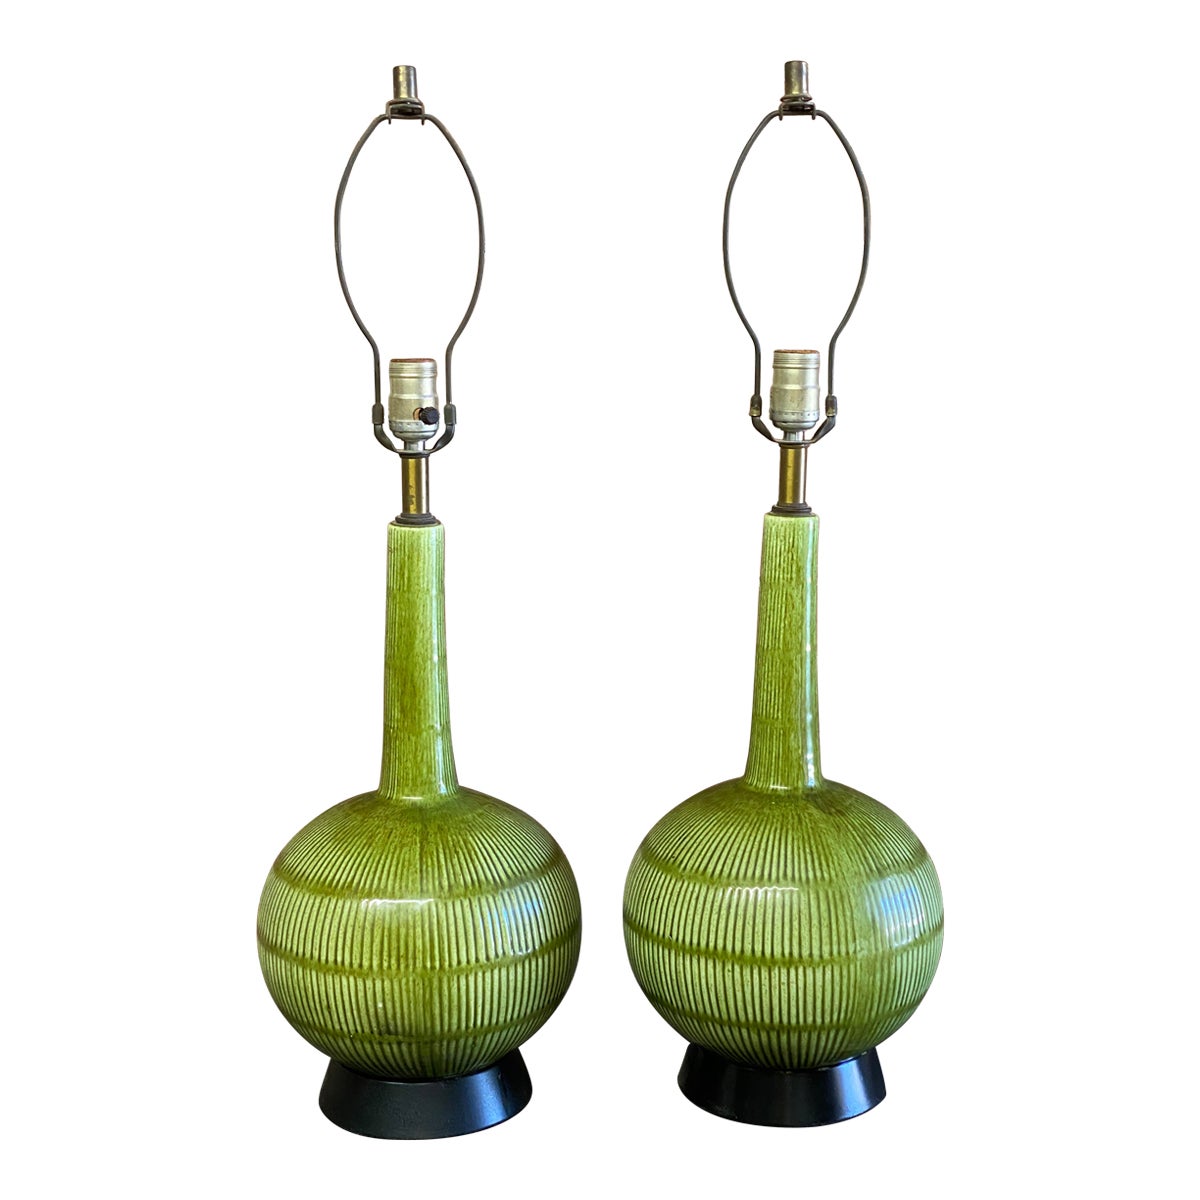 1960s Green Glaze Asian Inspired Ceramic Table Lamps, a Pair